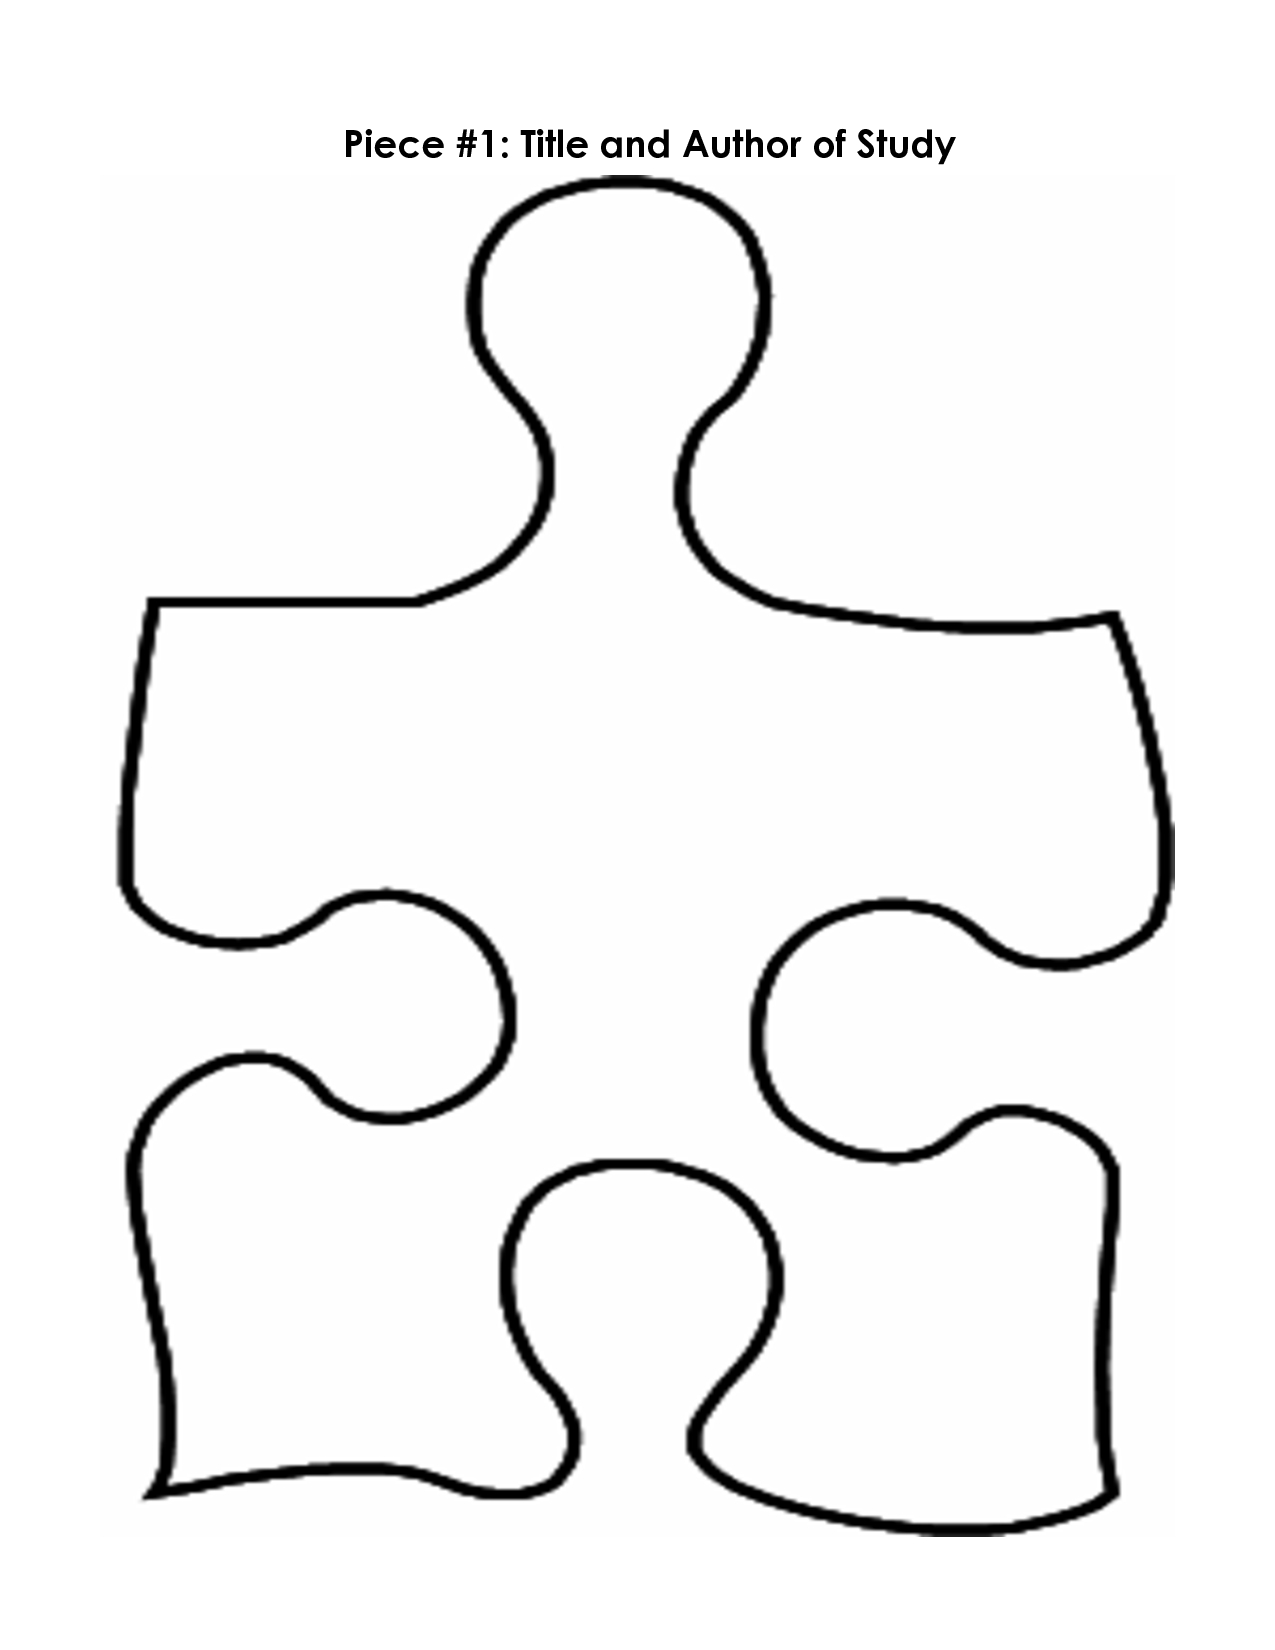 Free Puzzle Pieces Template, Download Free Clip Art, Free Clip Art - Printable 4 Piece Puzzle Template